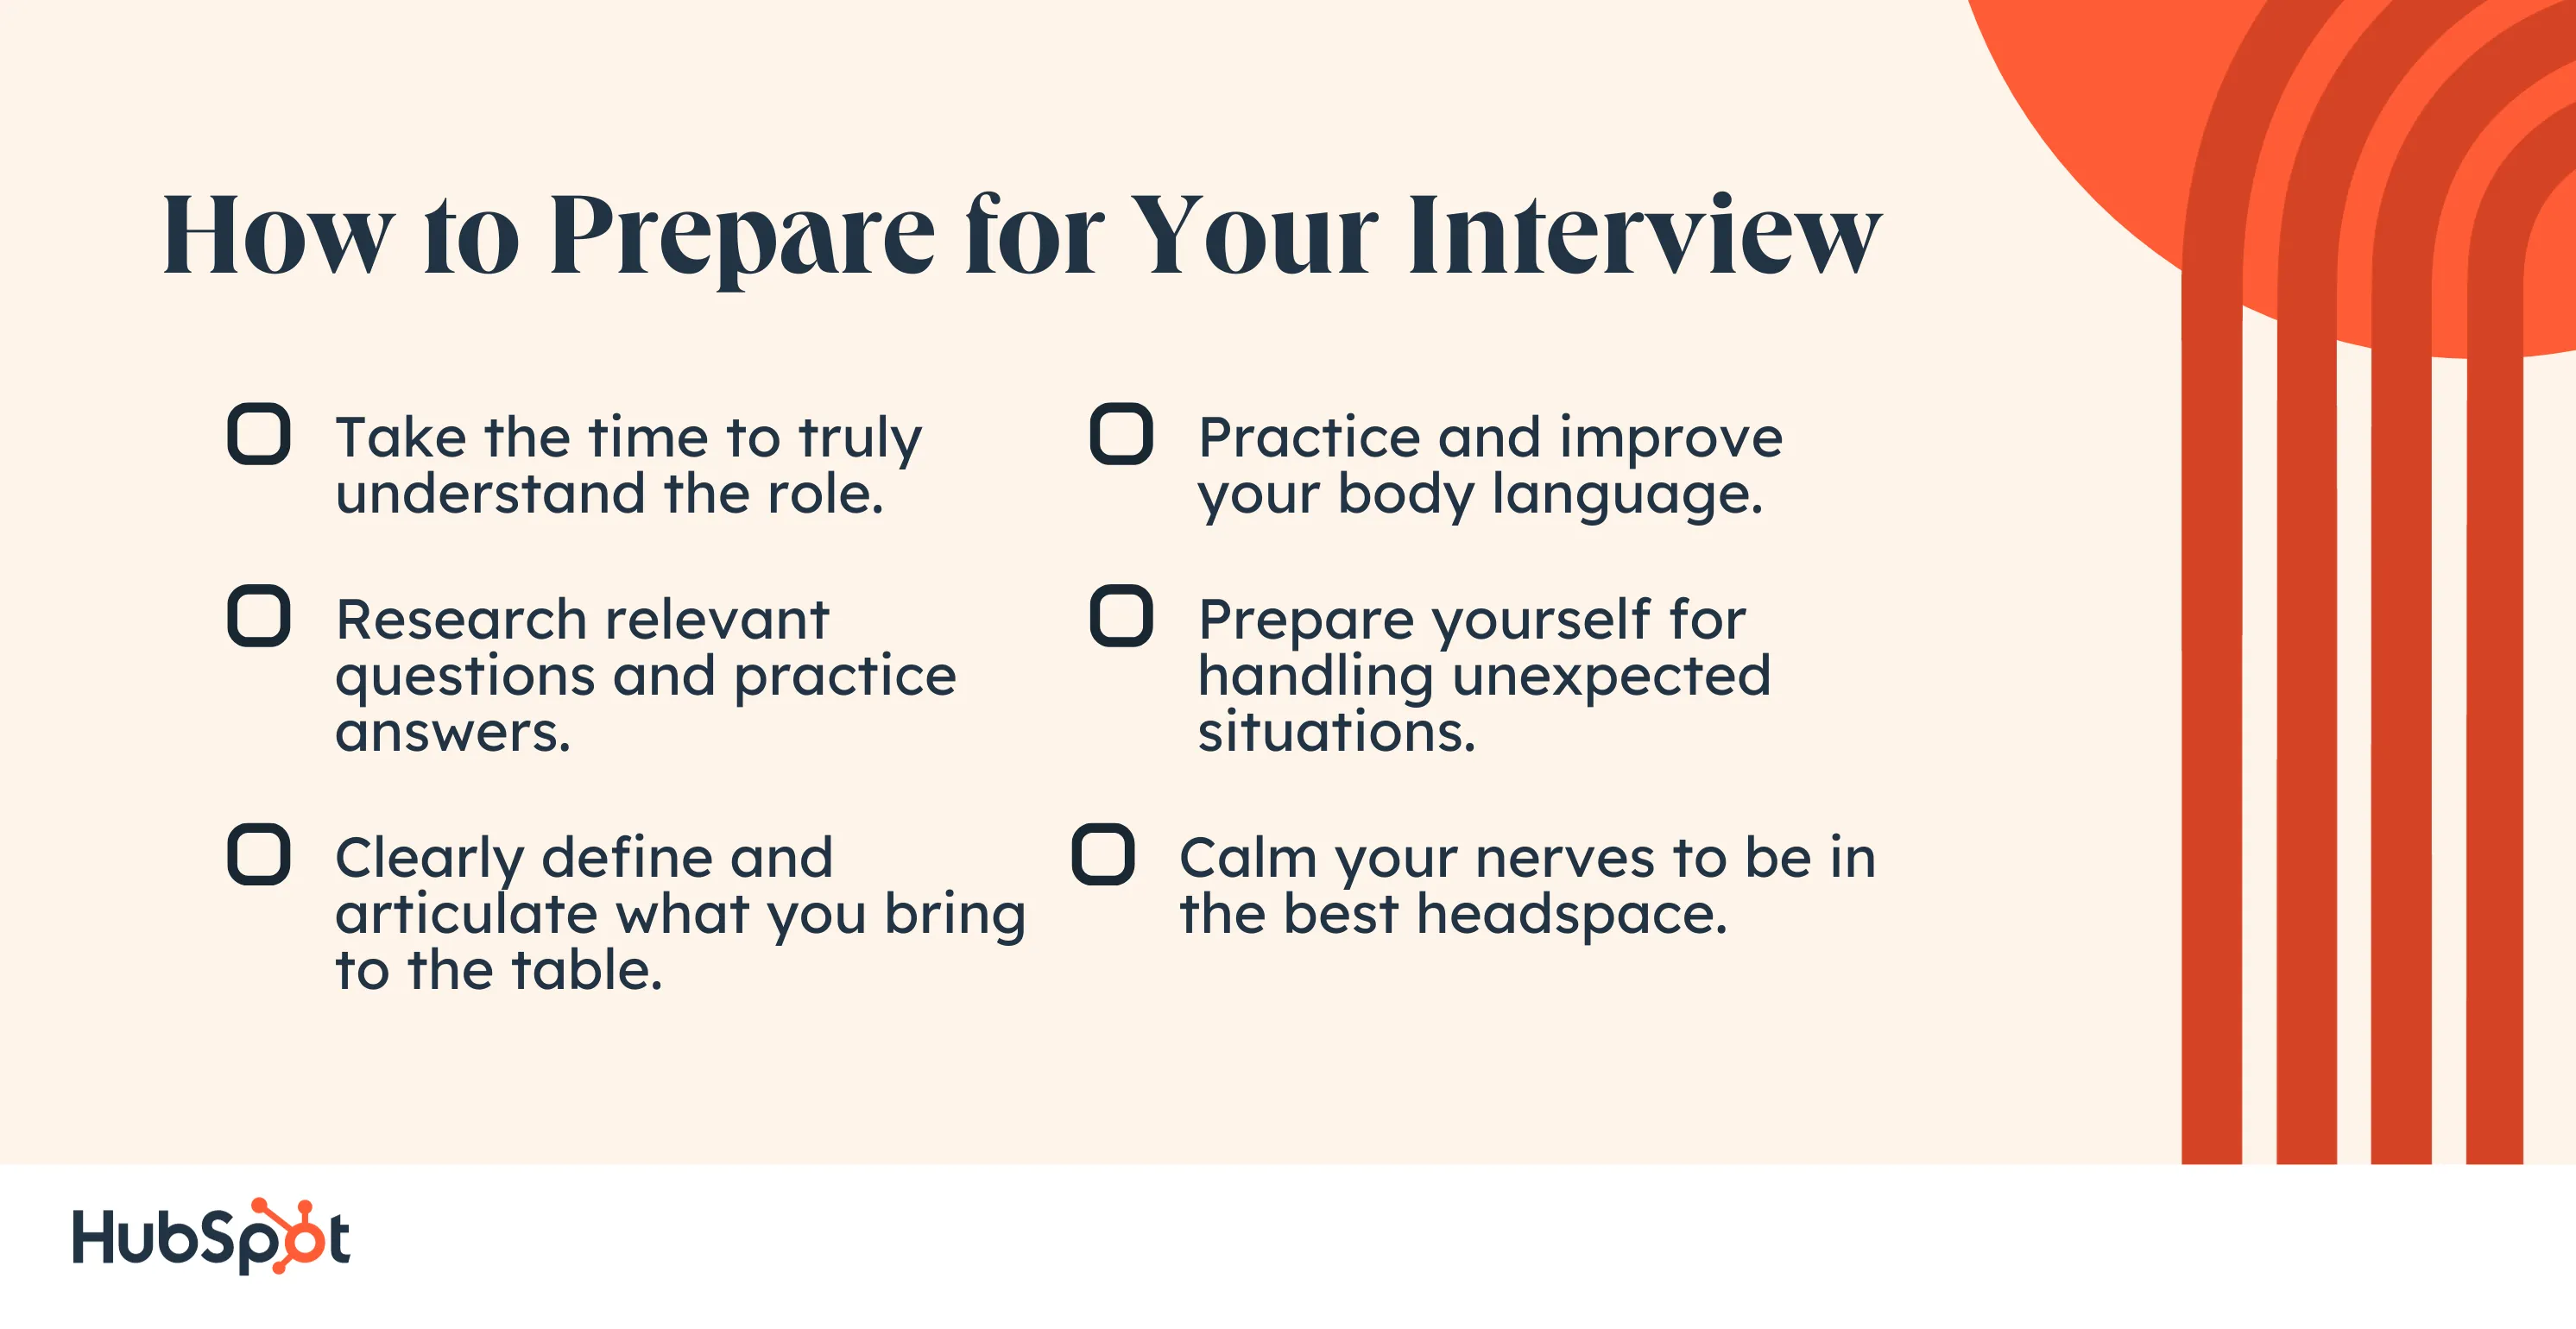 How To Improve Your Interview Skills